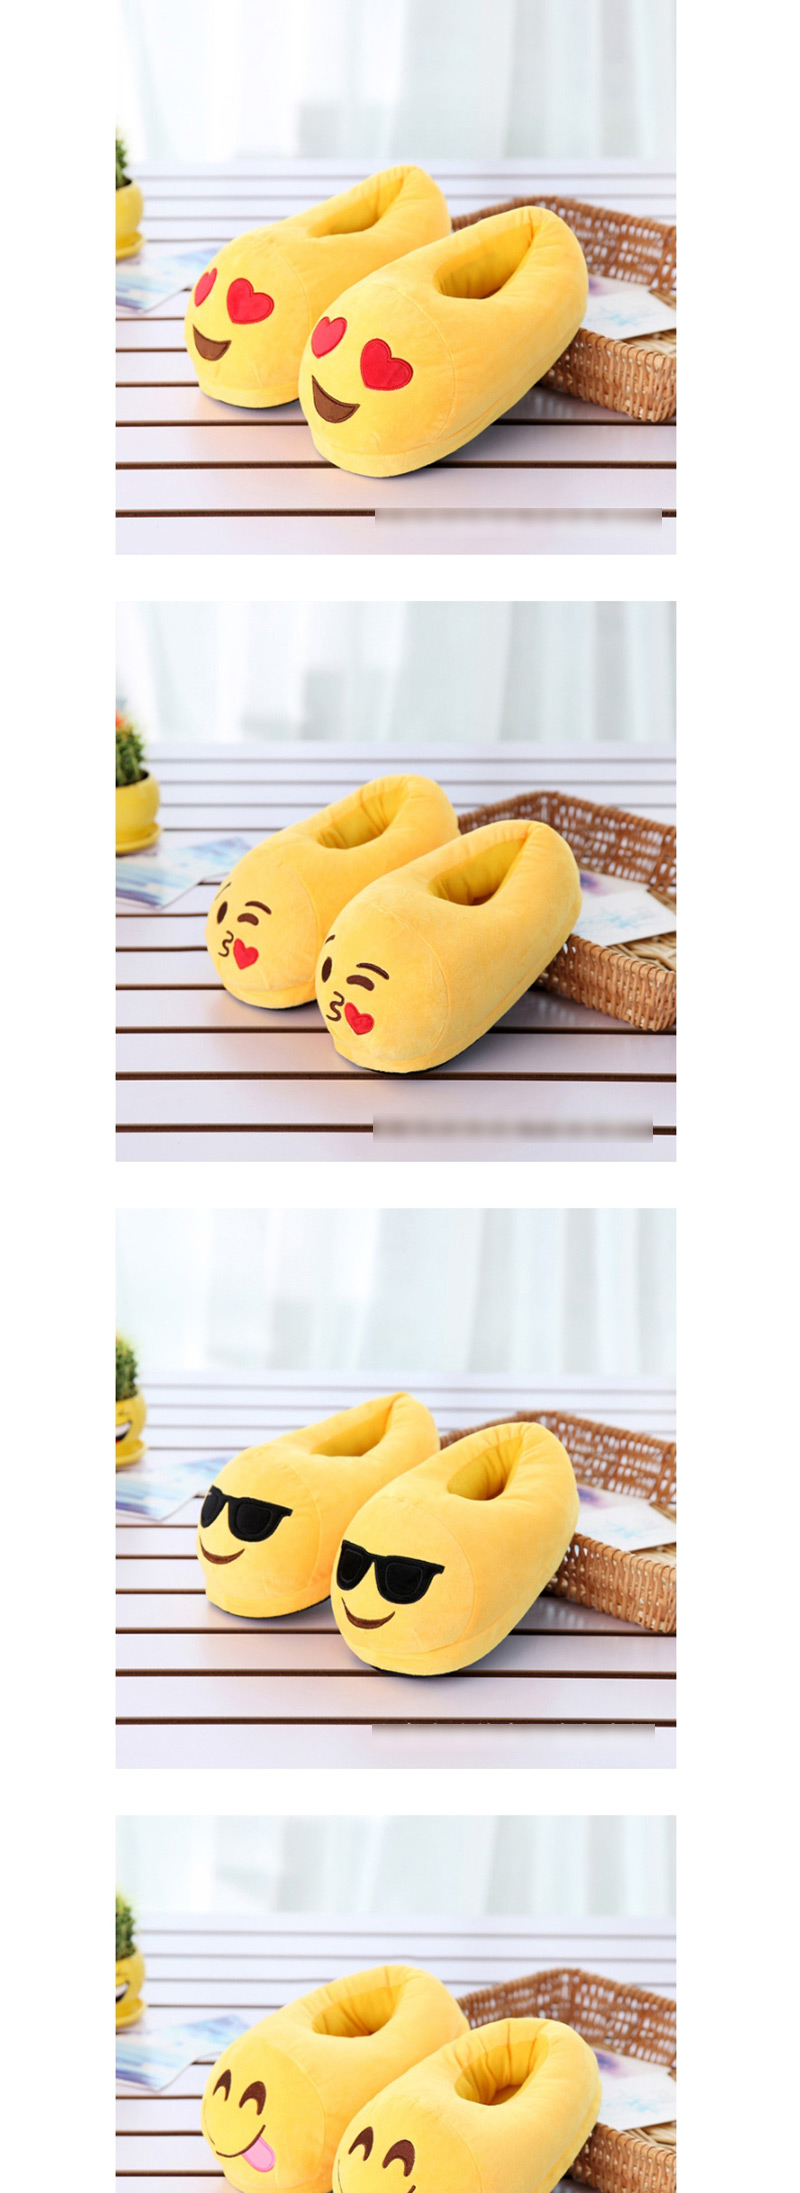 Fashion 3 Yellow Sunglasses Cartoon Expression Plush Bag With Cotton Slippers,Slippers